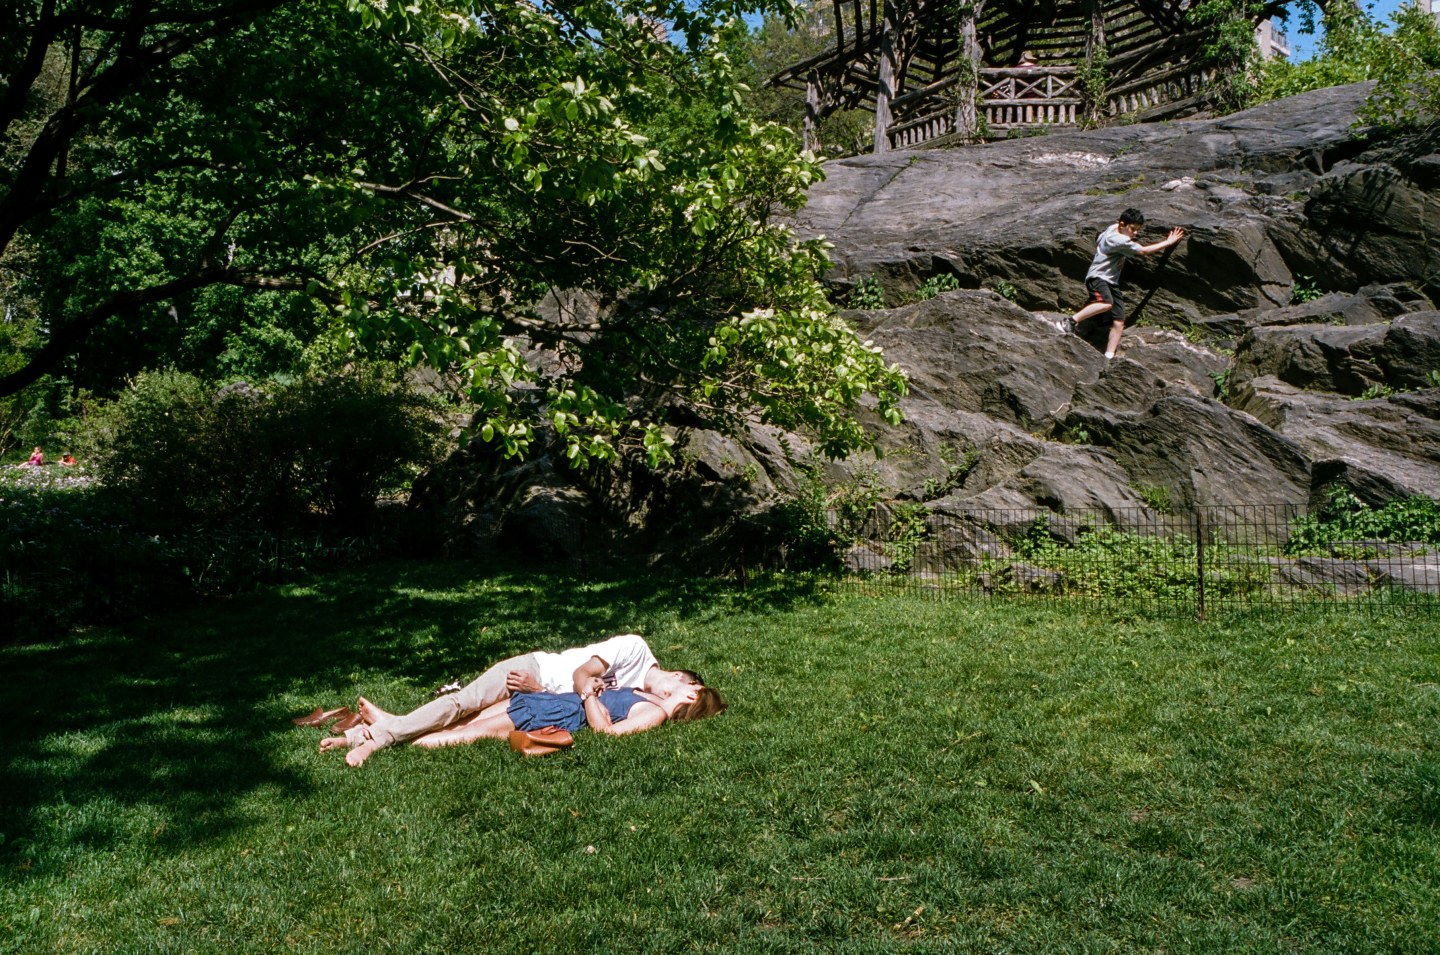 A Lurk At Summer In New York City’s Parks